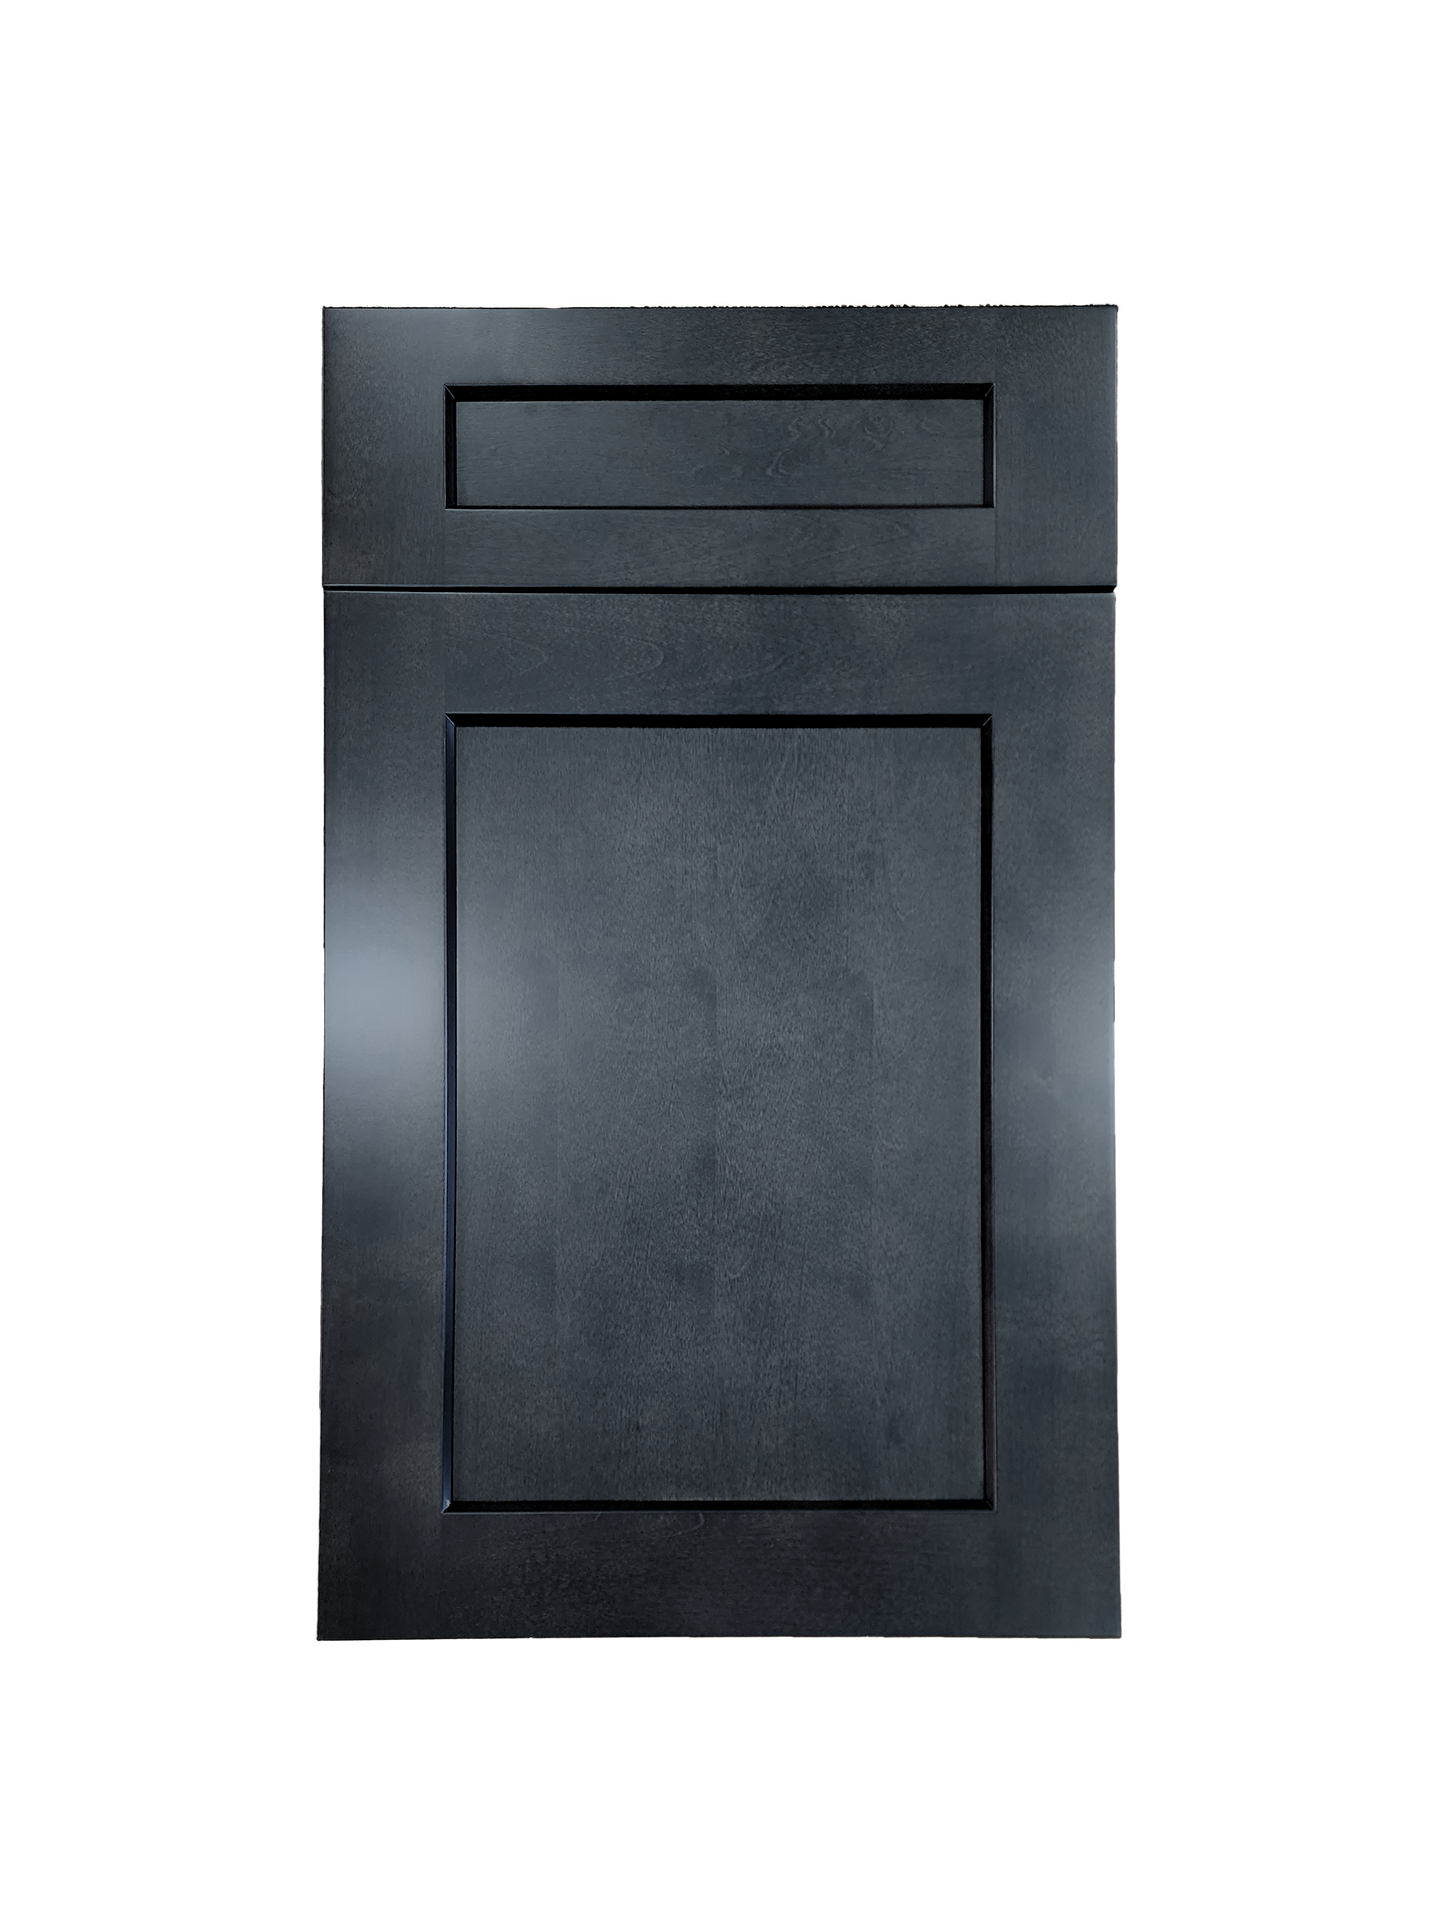 Stormy Grey Wall Cabinet 15 inches wide 12 inches deep 36 inches tall with Stormy Grey box and Stormy Grey doors